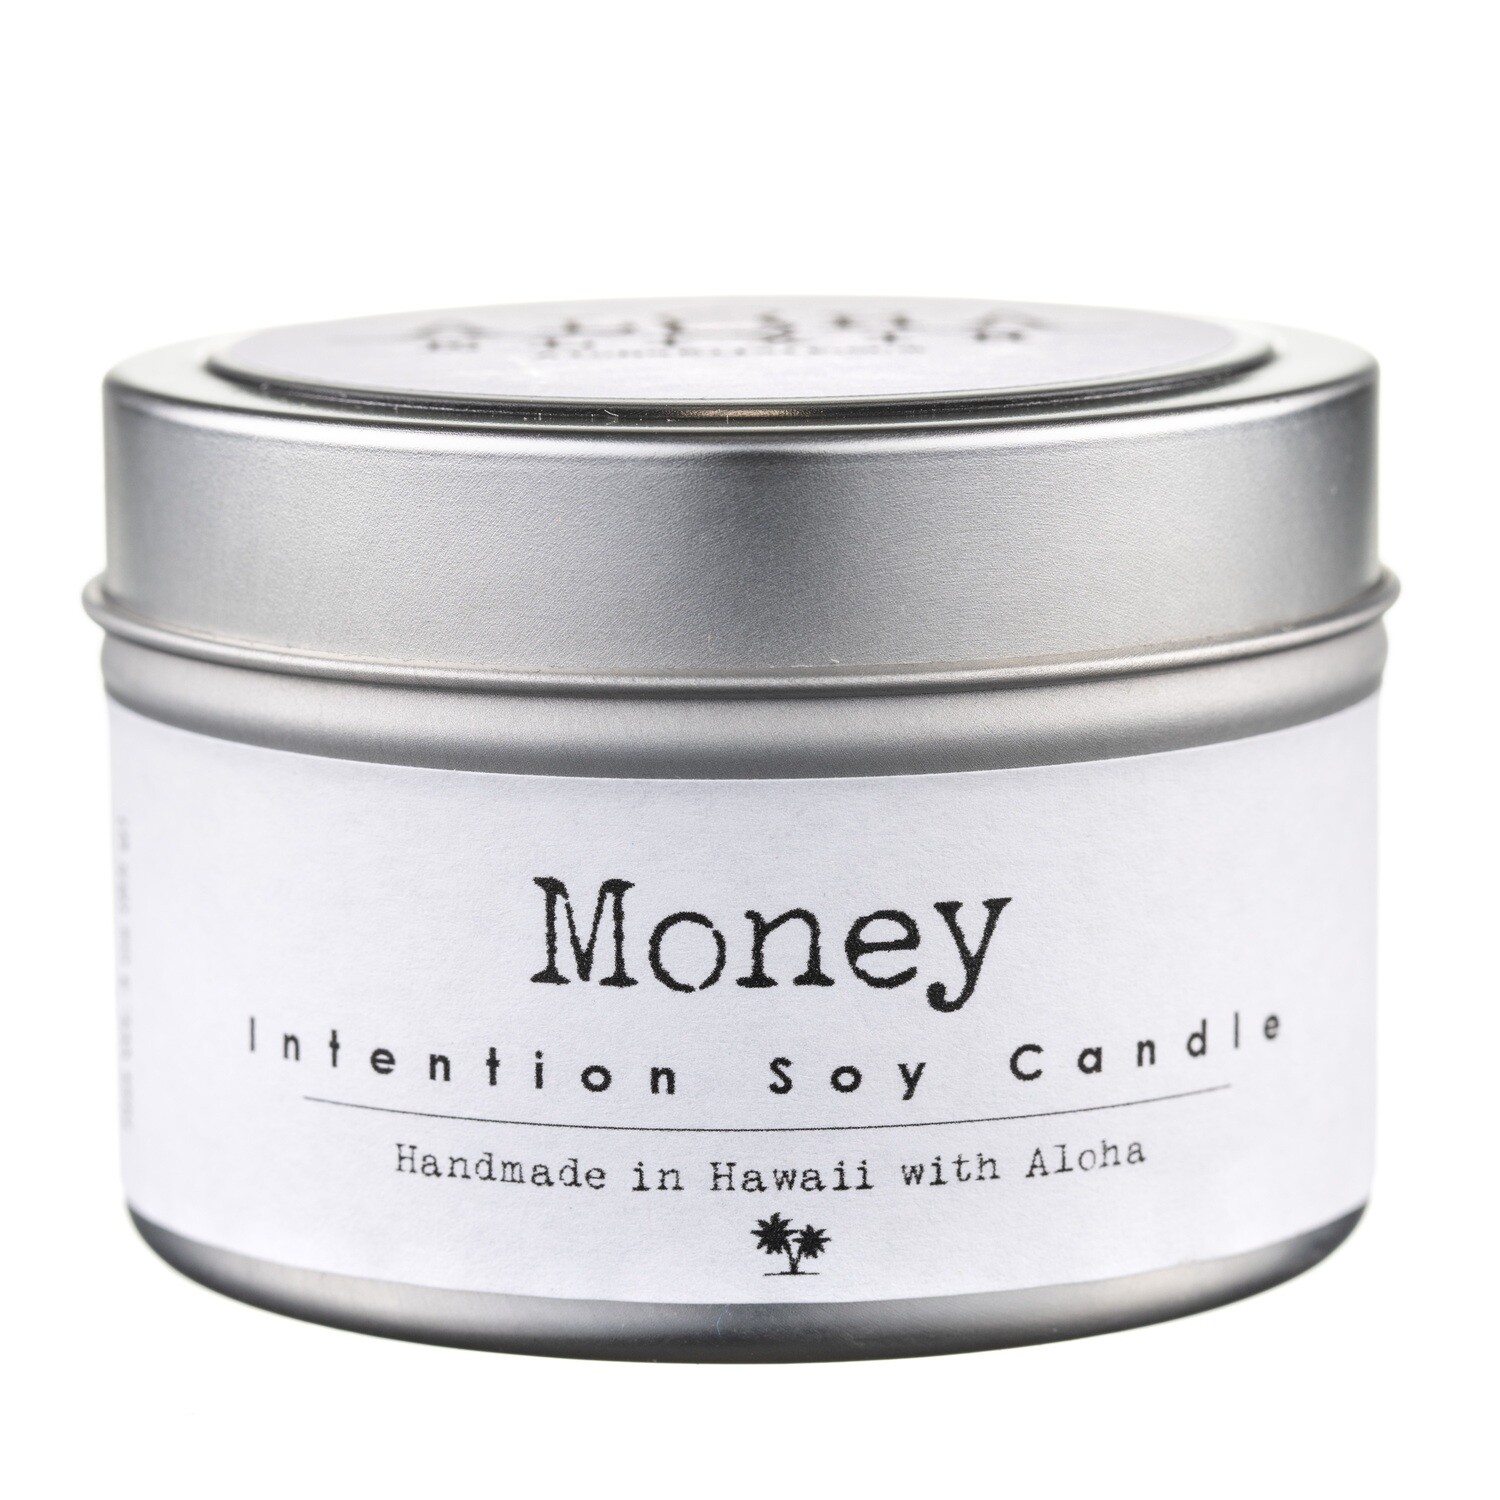 Money Intention Soy Candle